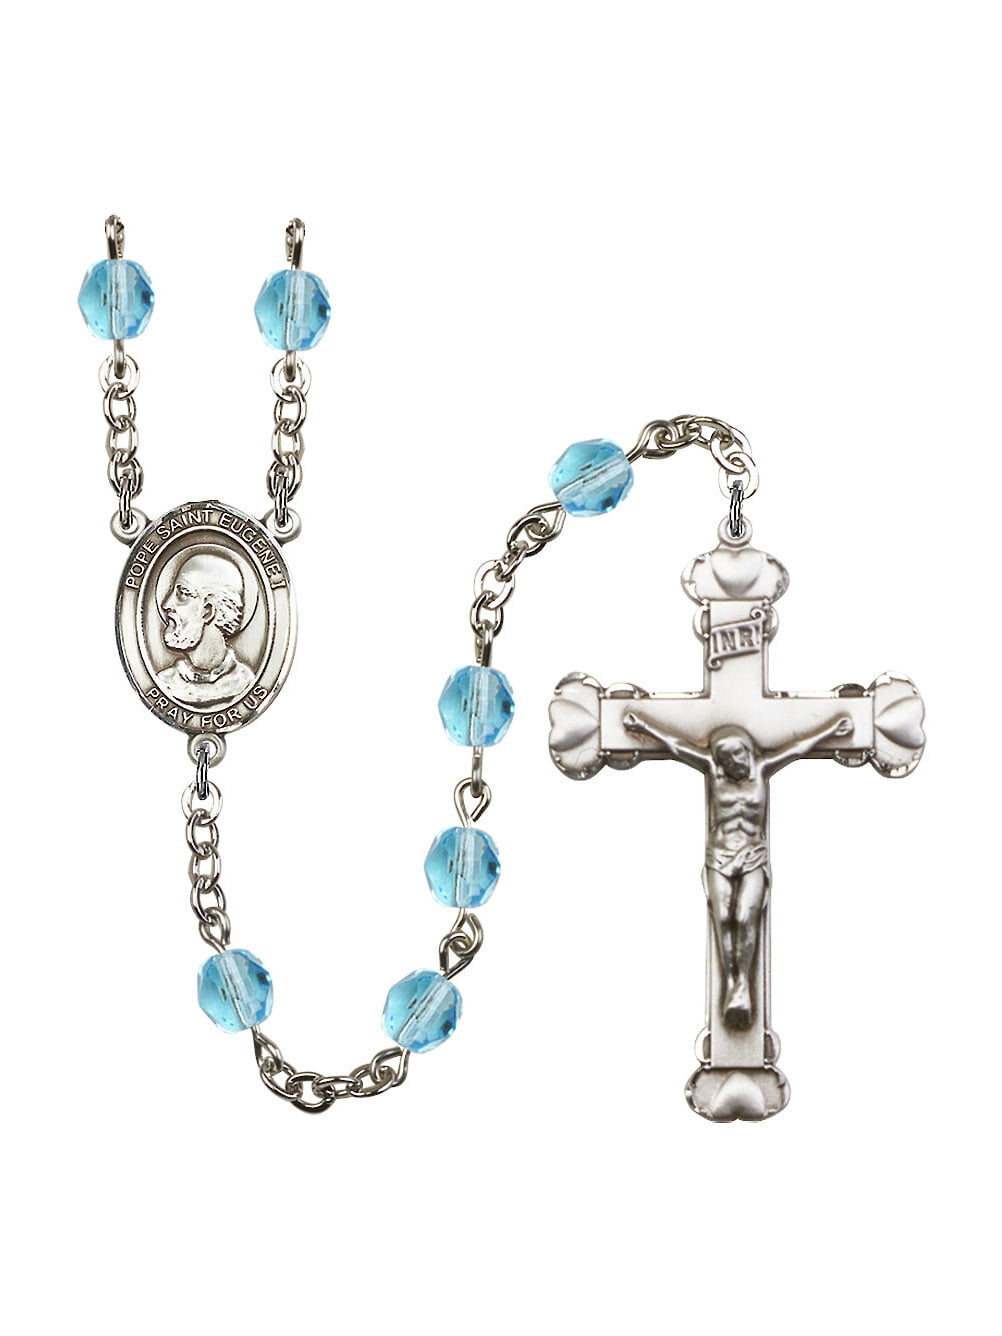 and 1 3/8 x 3/4 inch Crucifix Pope Saint Eugene I Center Silver Finish Pope Saint Eugene I Rosary with 6mm Aqua Color Fire Polished Beads Gift Boxed